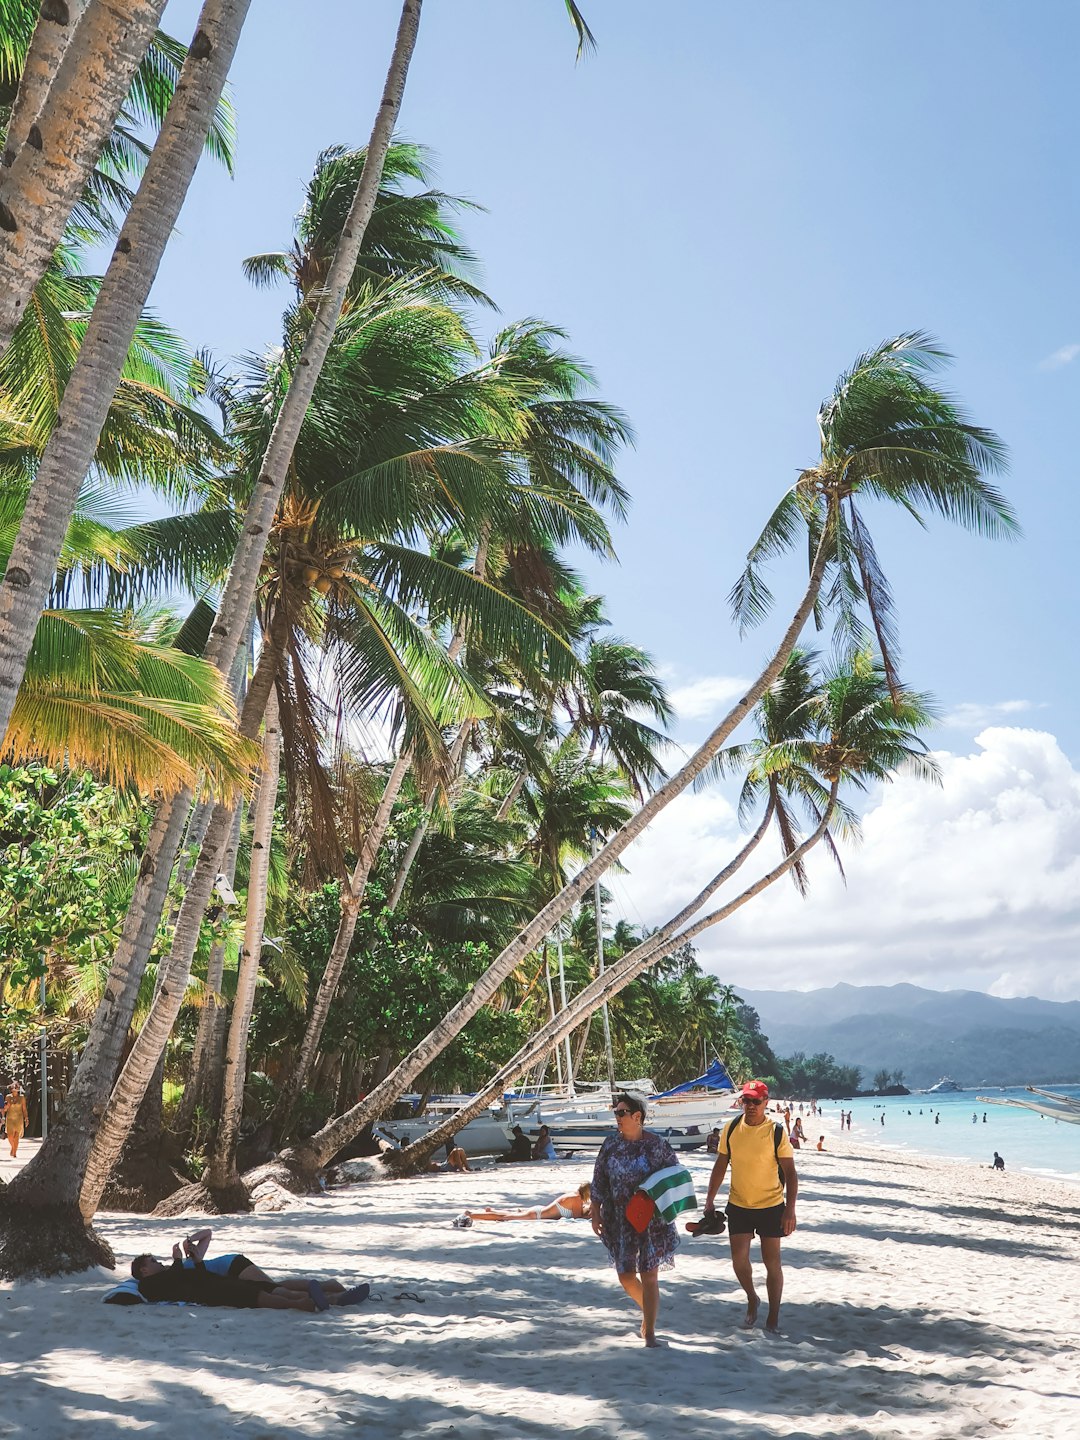 travelers stories about Beach in Boracay, Philippines